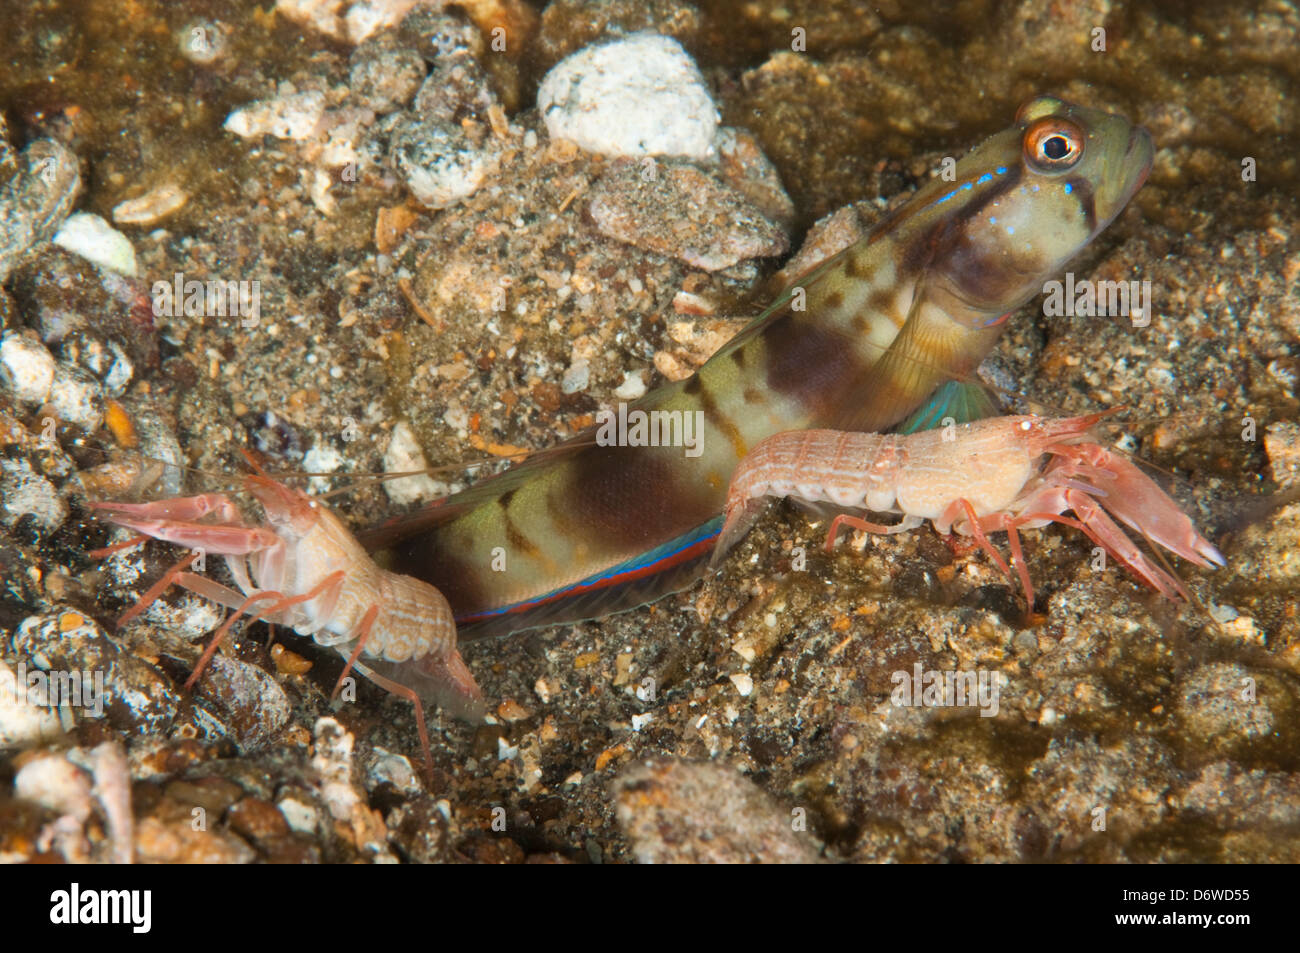 This shrimp goby gives protection to the two blind shrimp that work all day at keeping his hole clear. Stock Photo